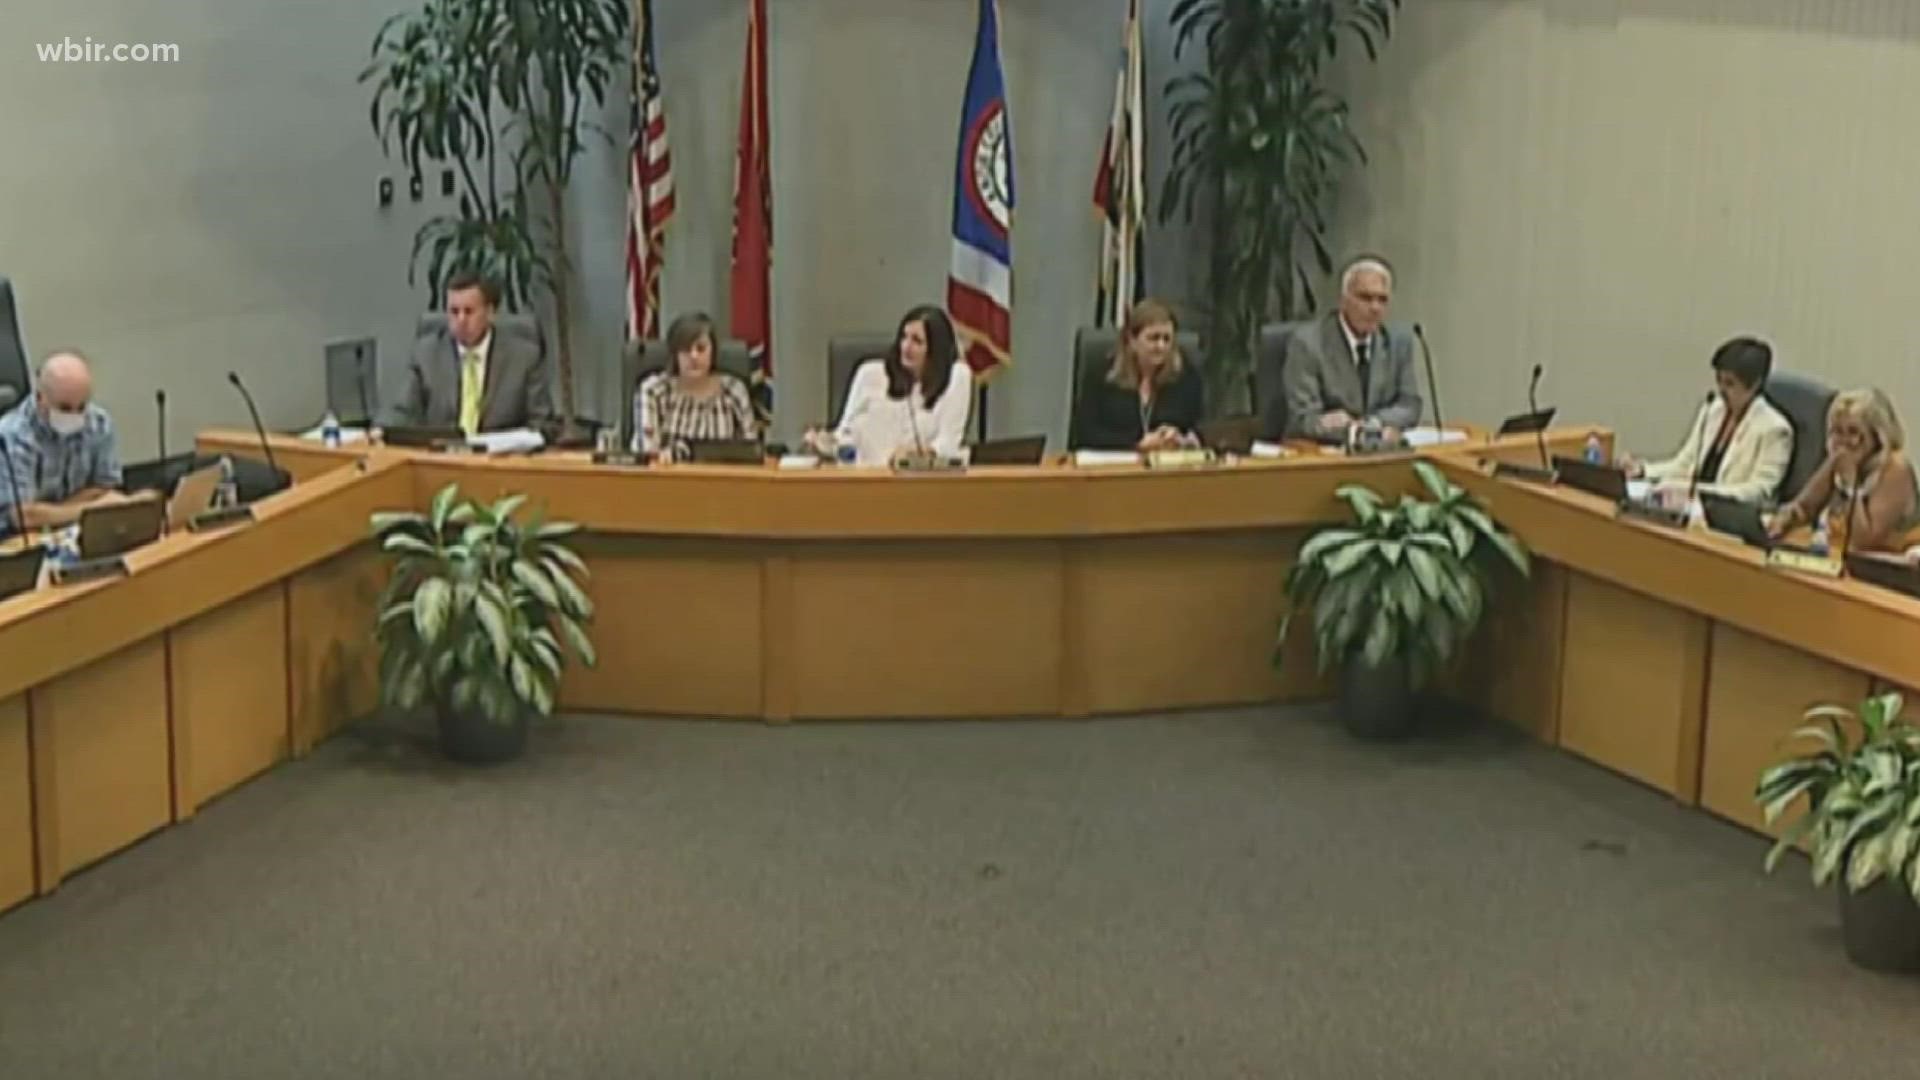 On Wednesday, the meeting turned into an intense discussion about the power and authority of the board of education.